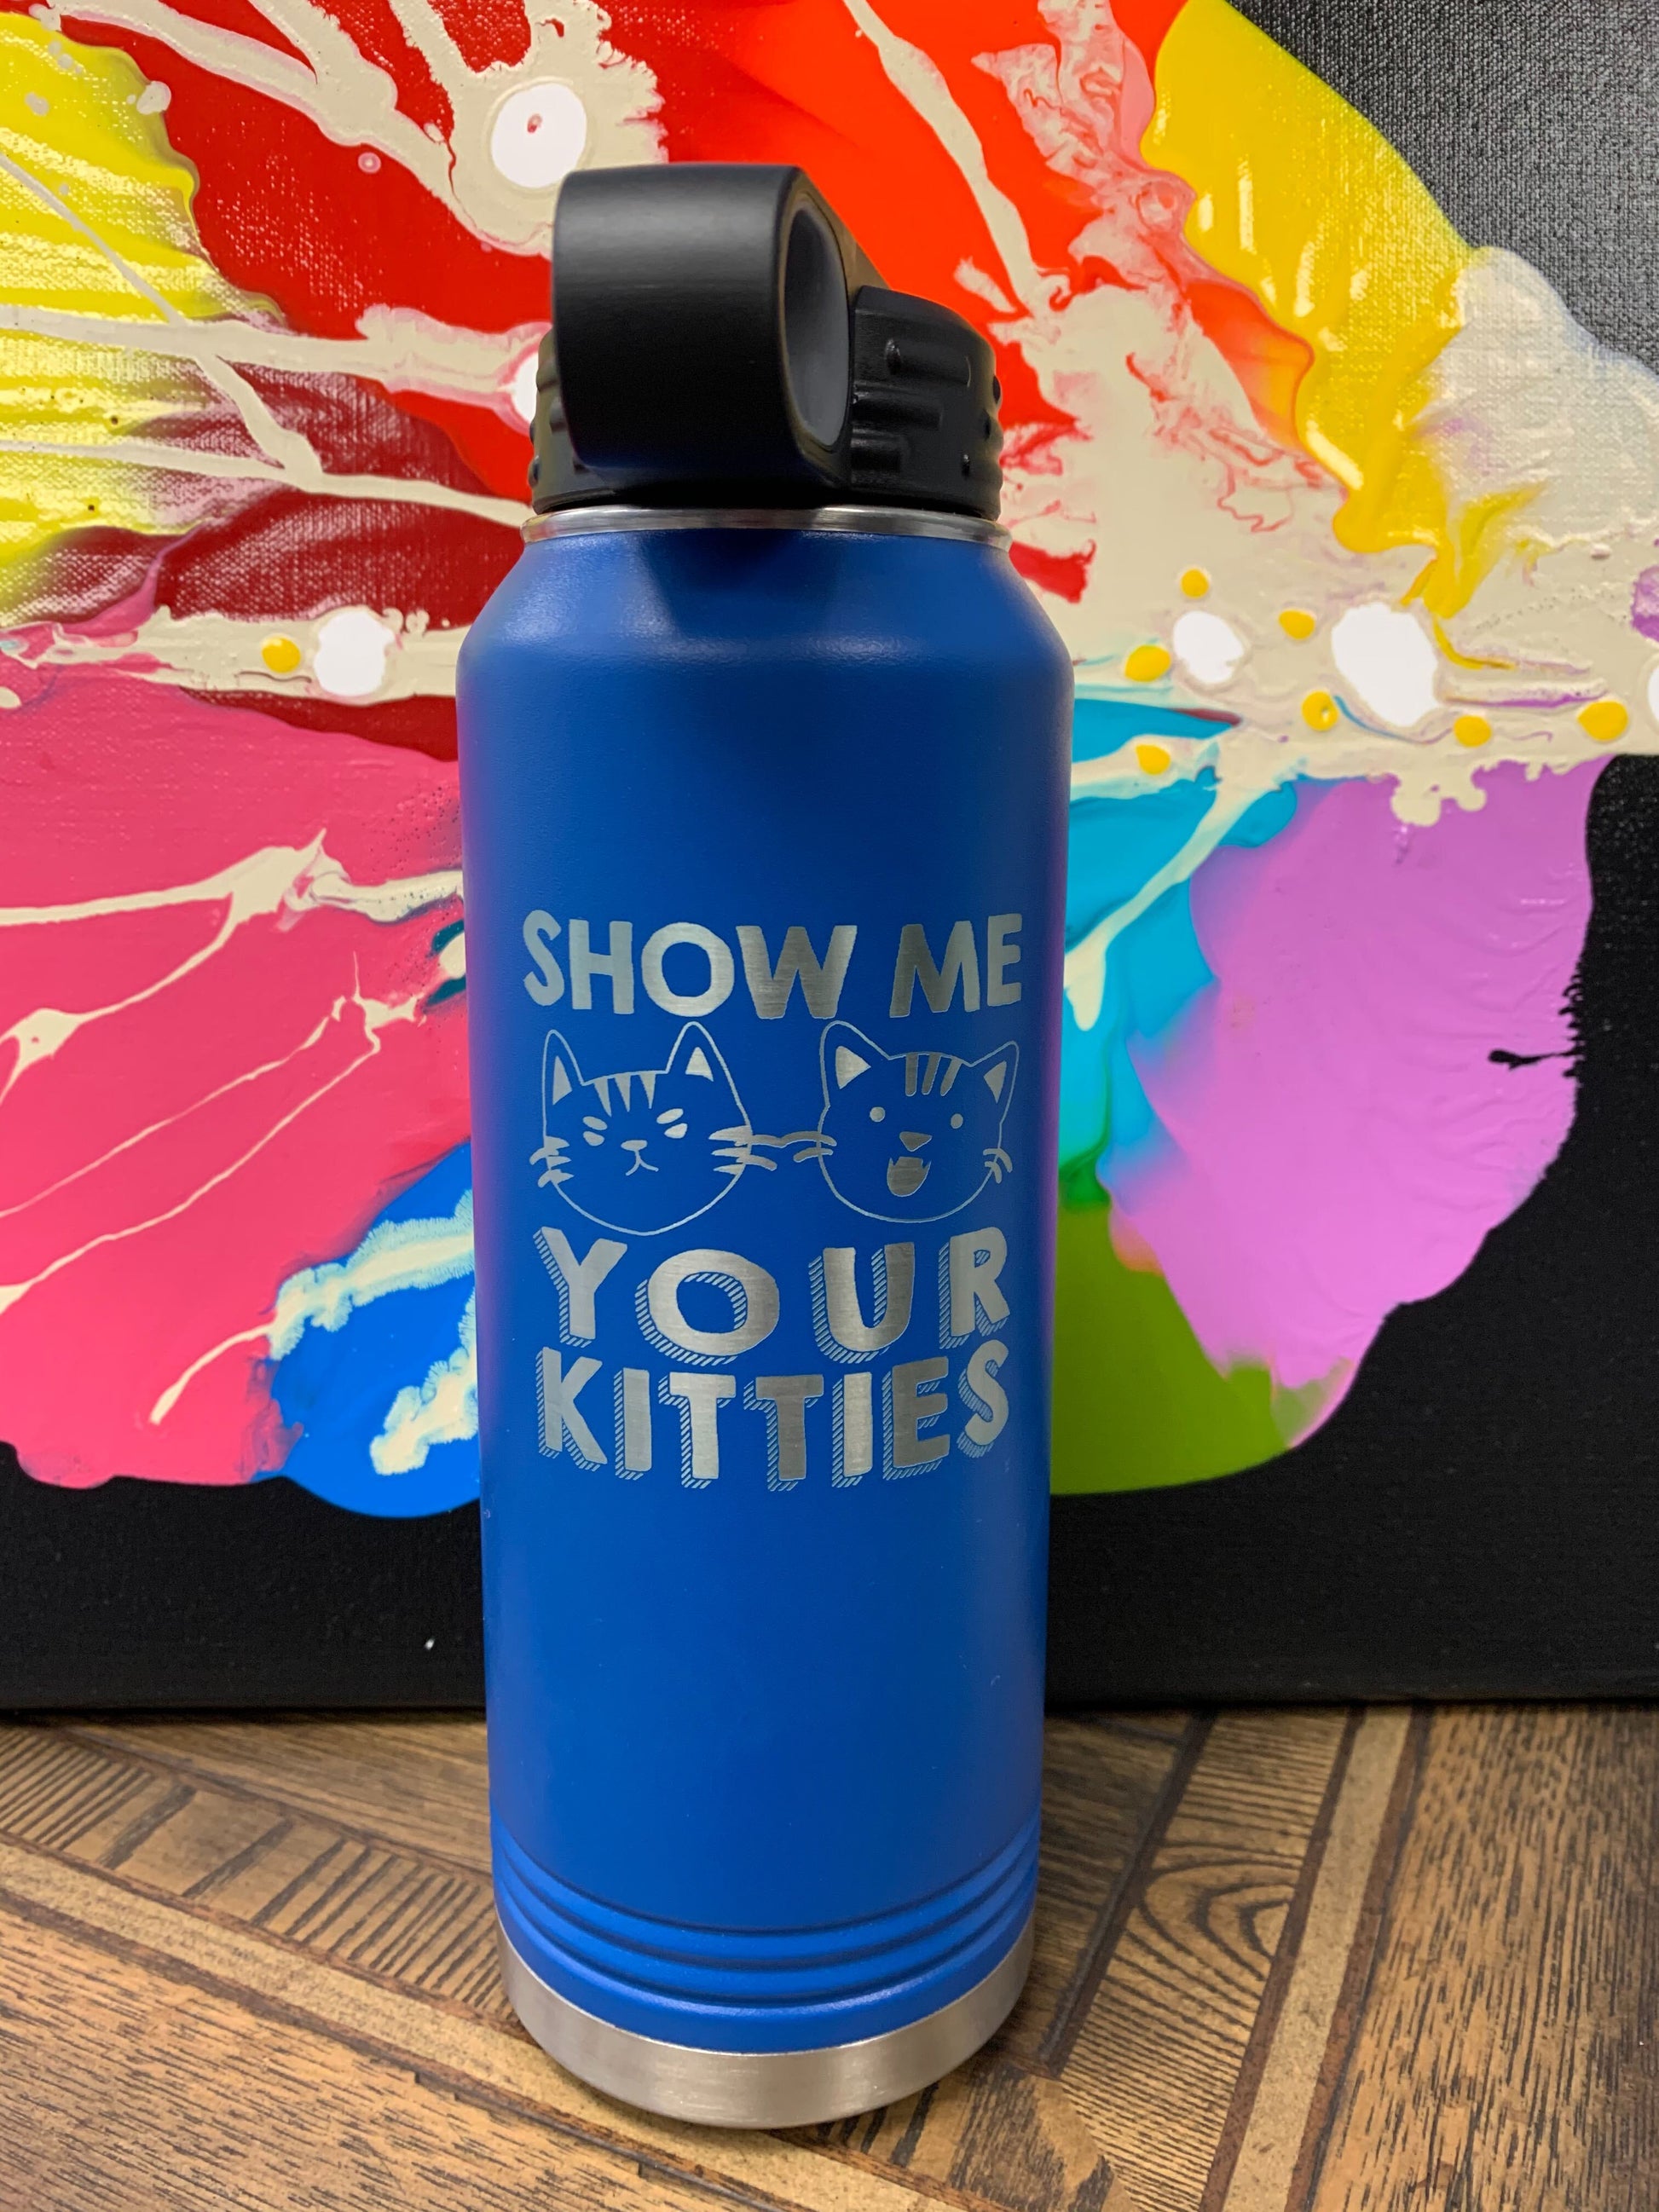 Image of an insulated tumbler bottle in Royal with black plastic screw-on lid, featuring two cat faces, and the words "show me your kitties" laser etched in the side of the bottle.